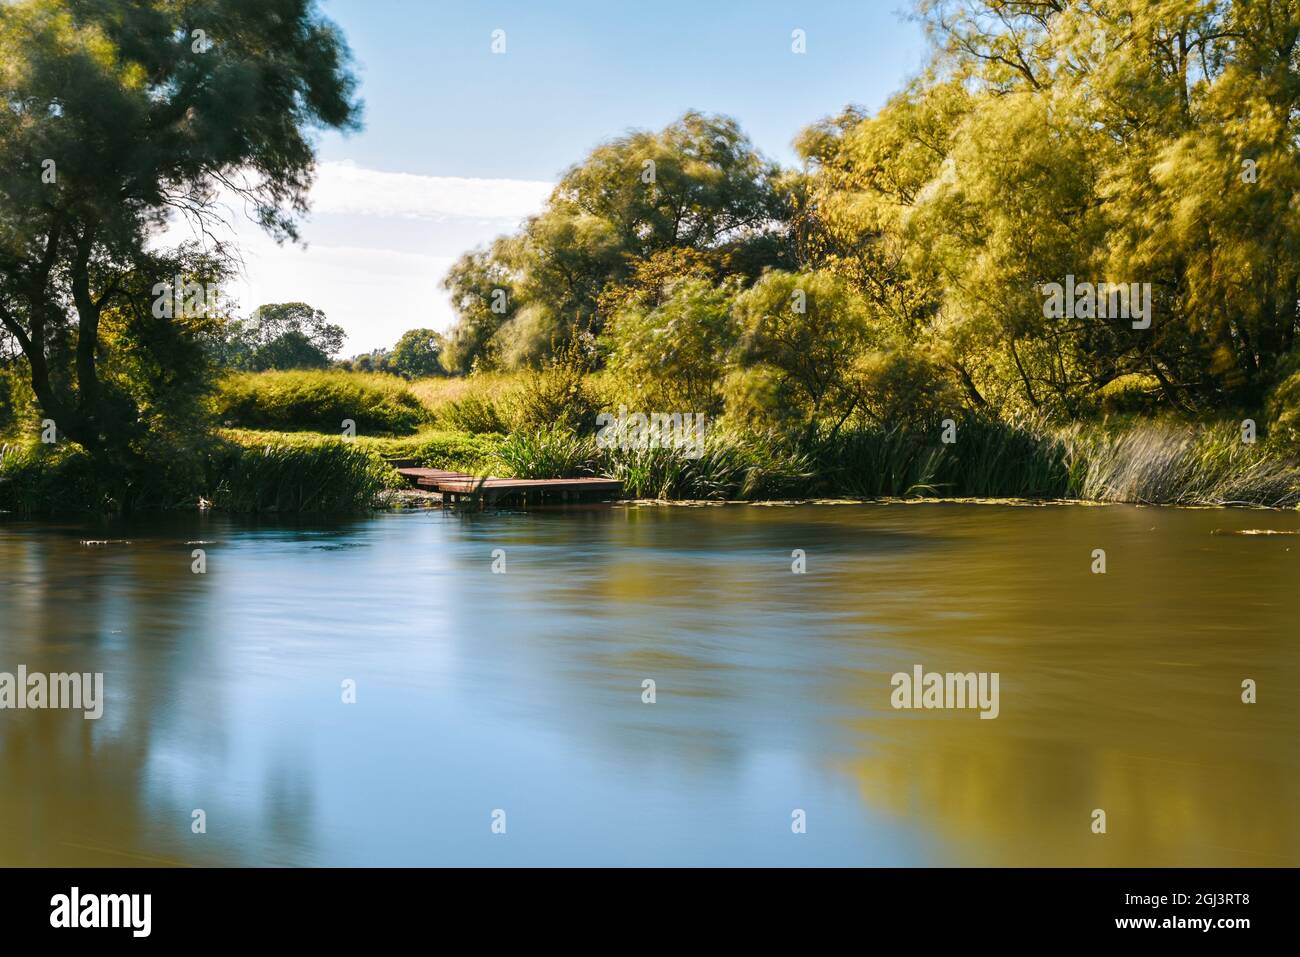 Calm water on a lake in a quiet countryside location Stock Photo